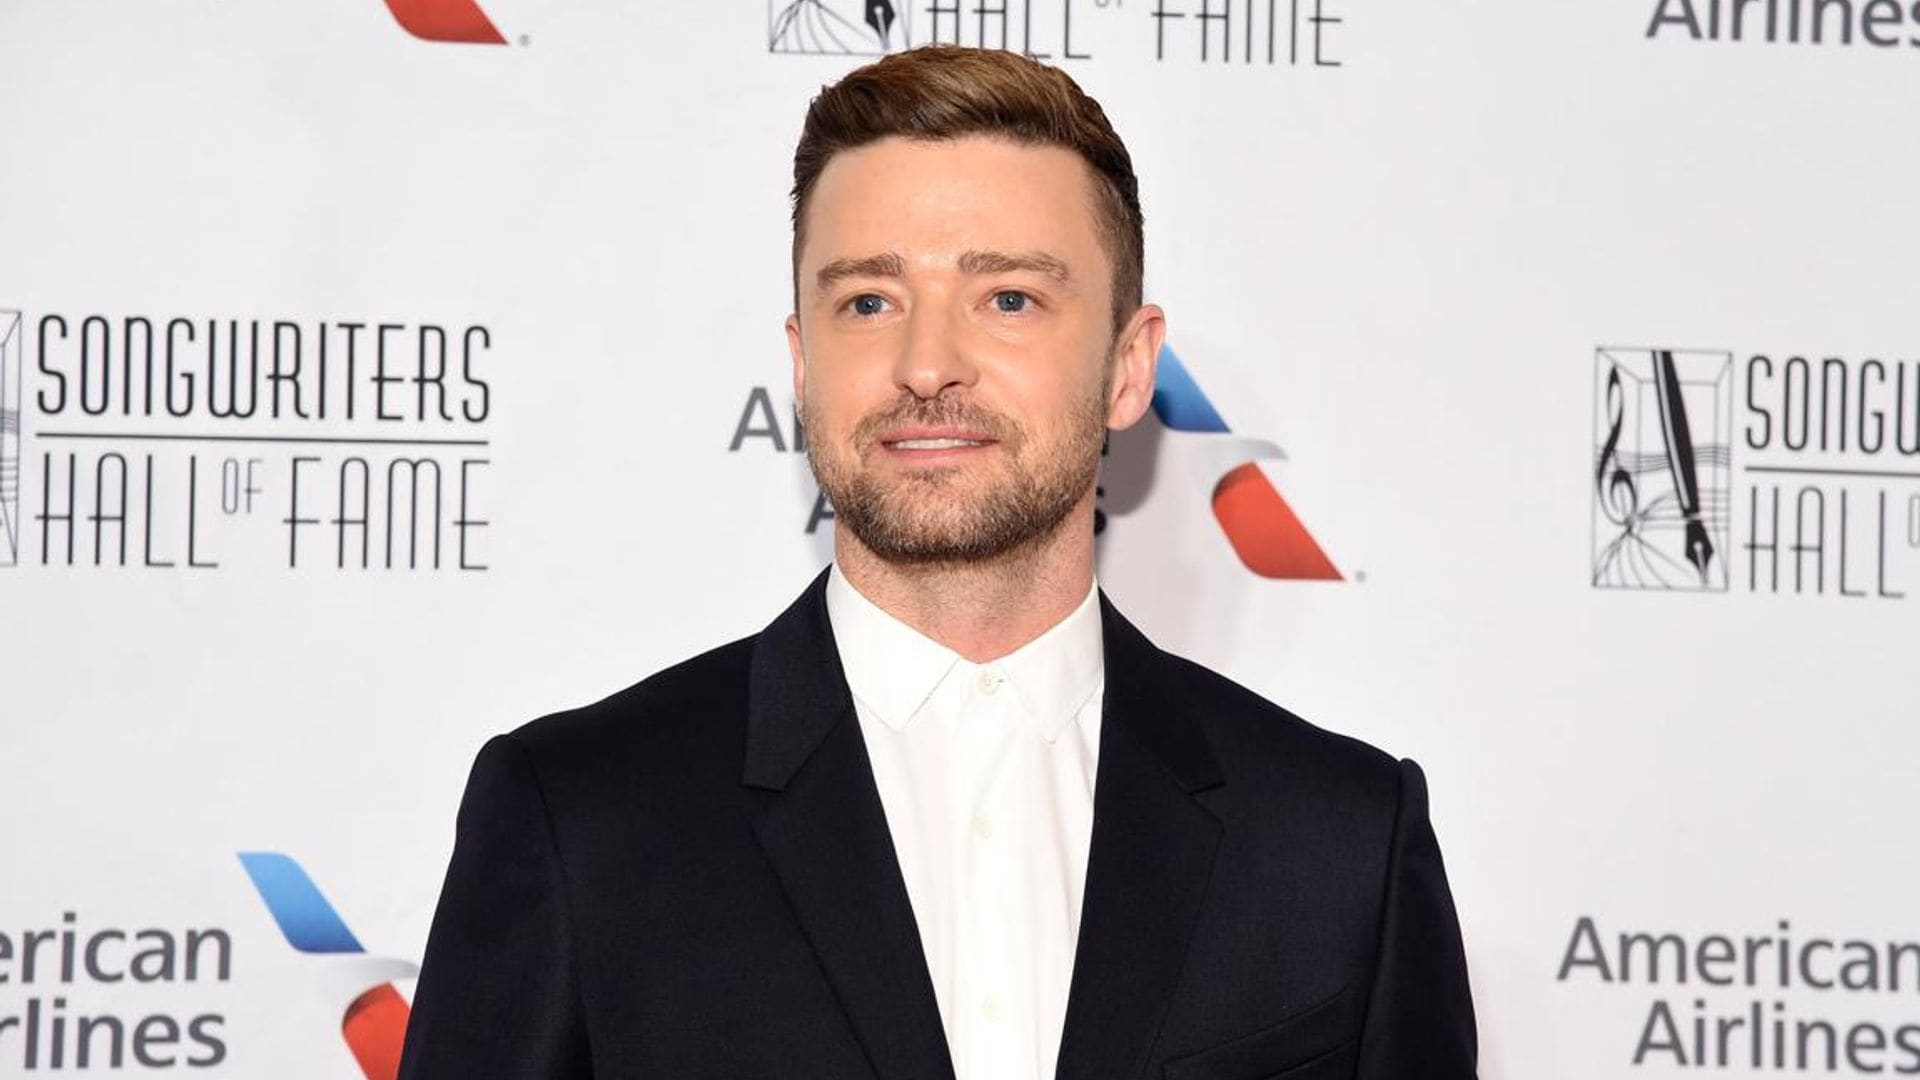 Justin Timberlake surprises phone bankers for 2020 election by crashing their Zoom call